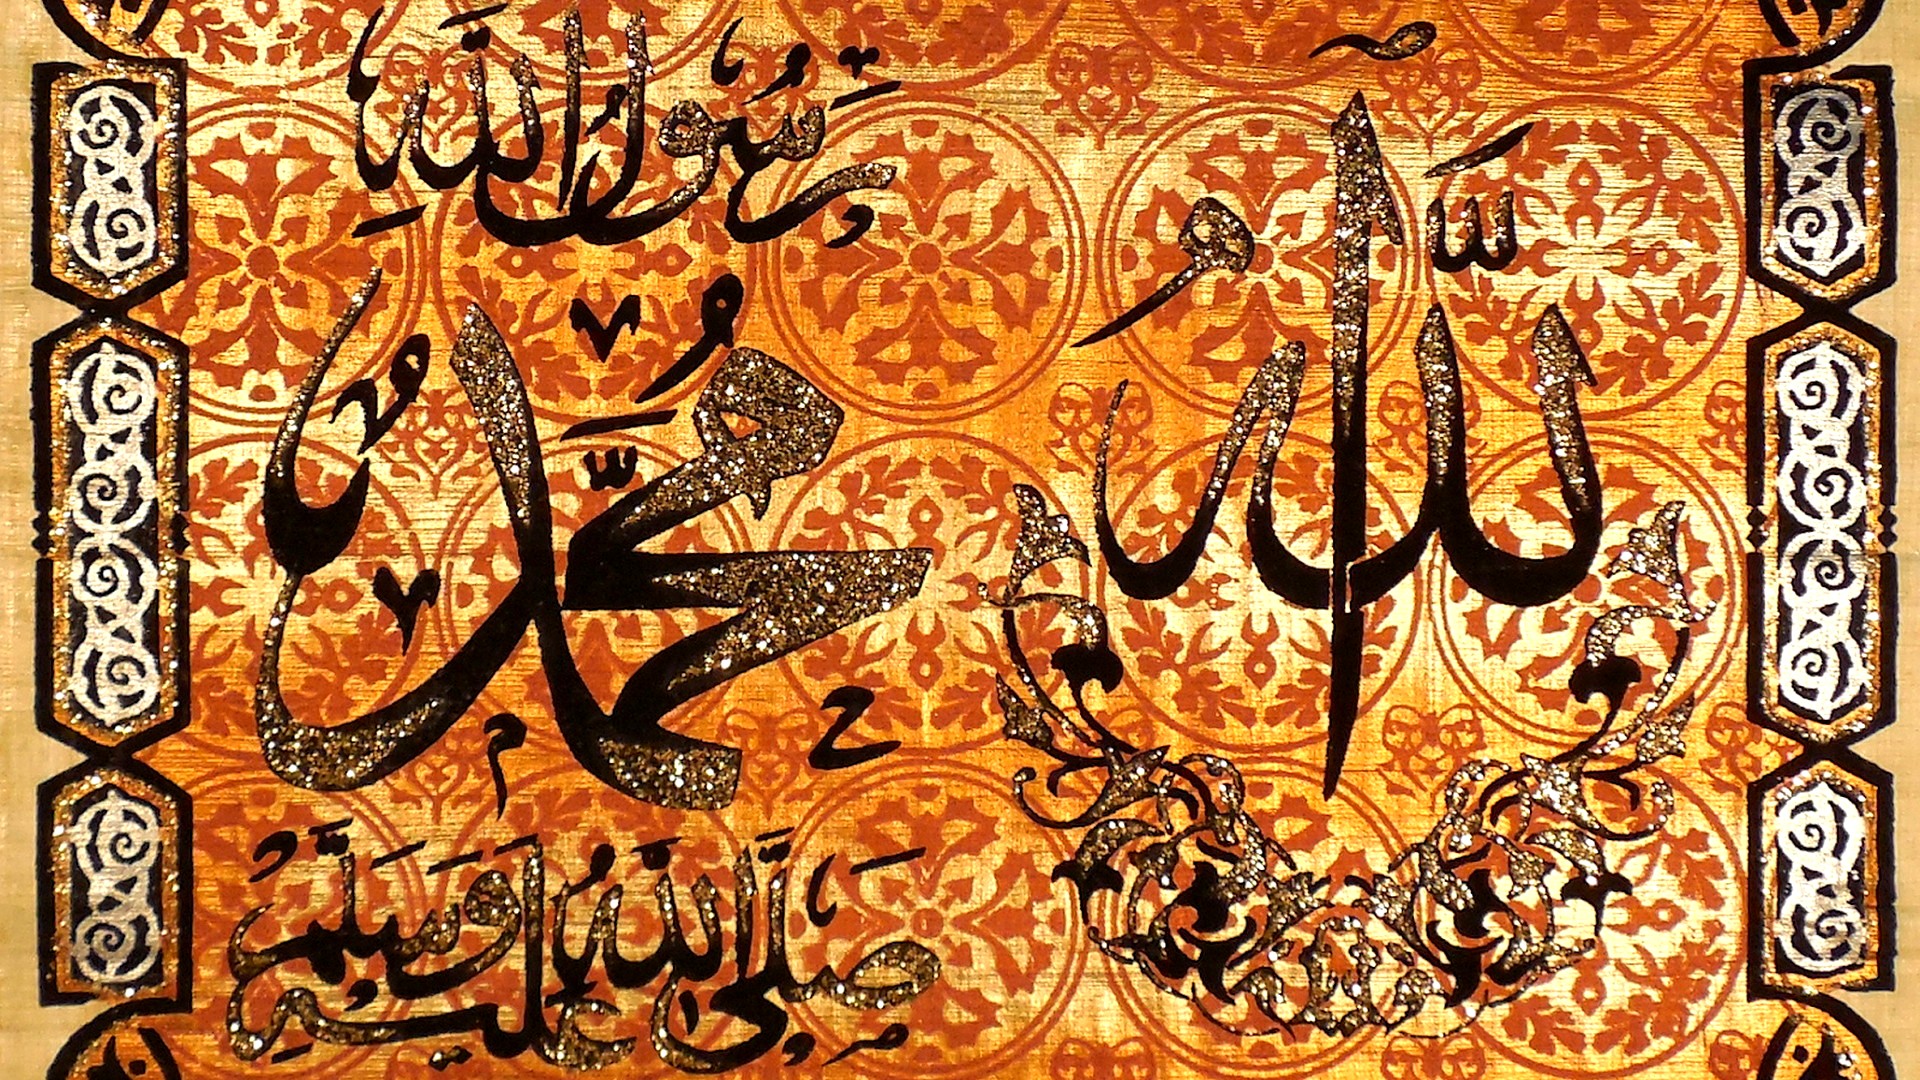 Muhammad Desktop Wallpaper HD with high-resolution 1920x1080 pixel. You can use and set as wallpaper for Notebook Screensavers, Mac Wallpapers, Mobile Home Screen, iPhone or Android Phones Lock Screen